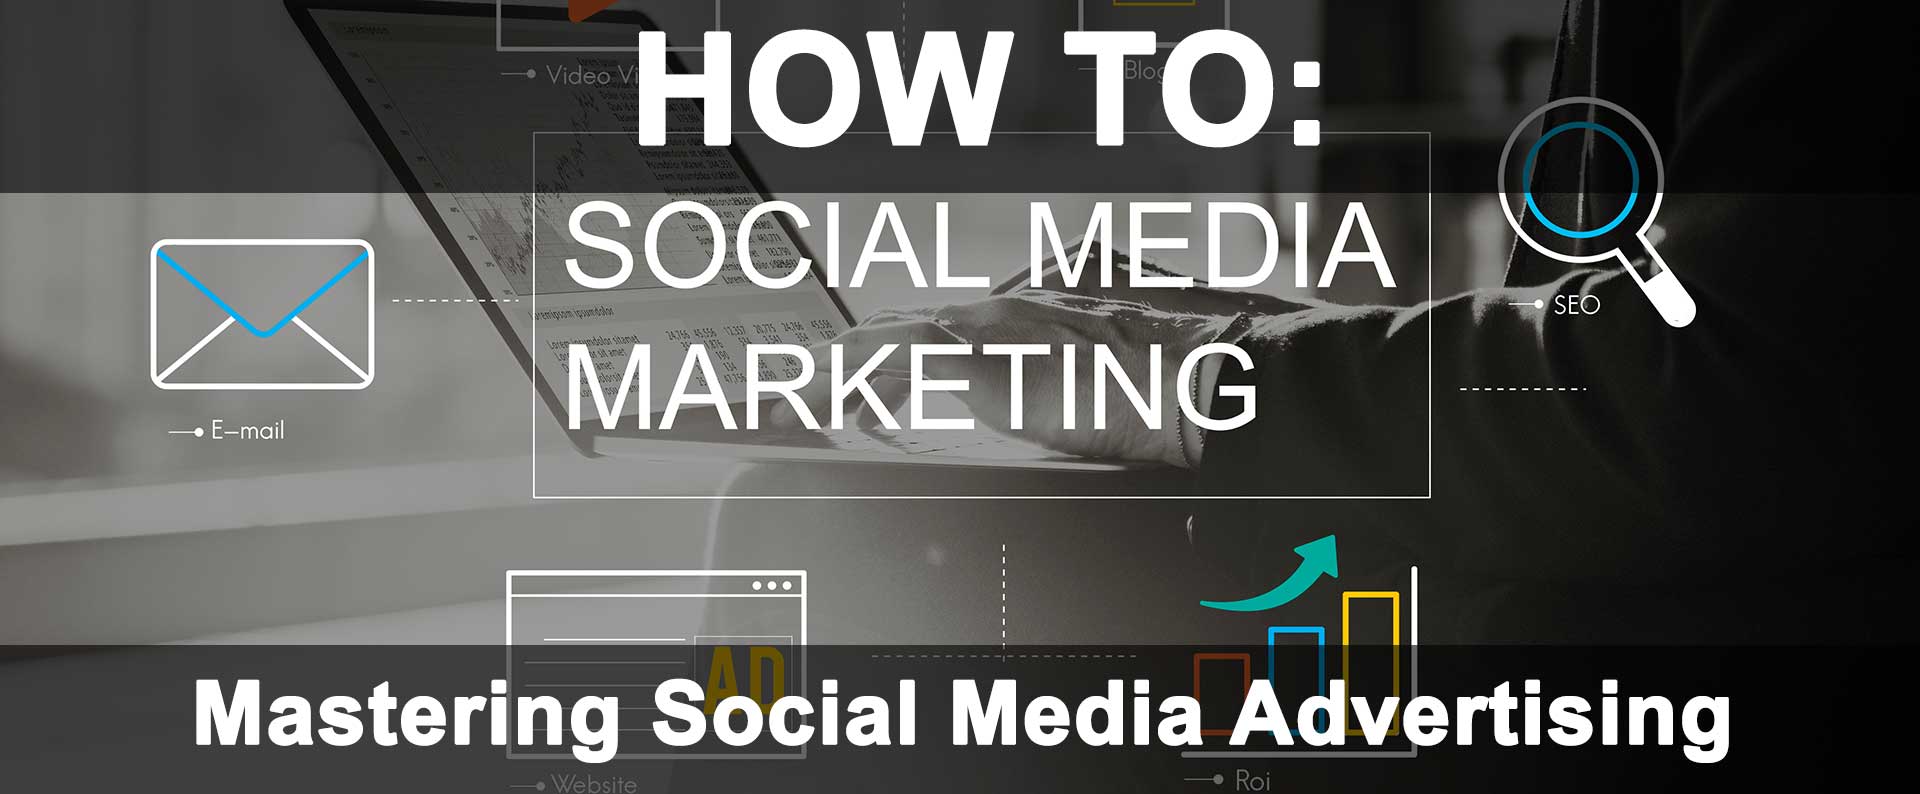 How To Advertise On Social Media - Avoiding Common Advertising Mistakes (Part 3 of 3)